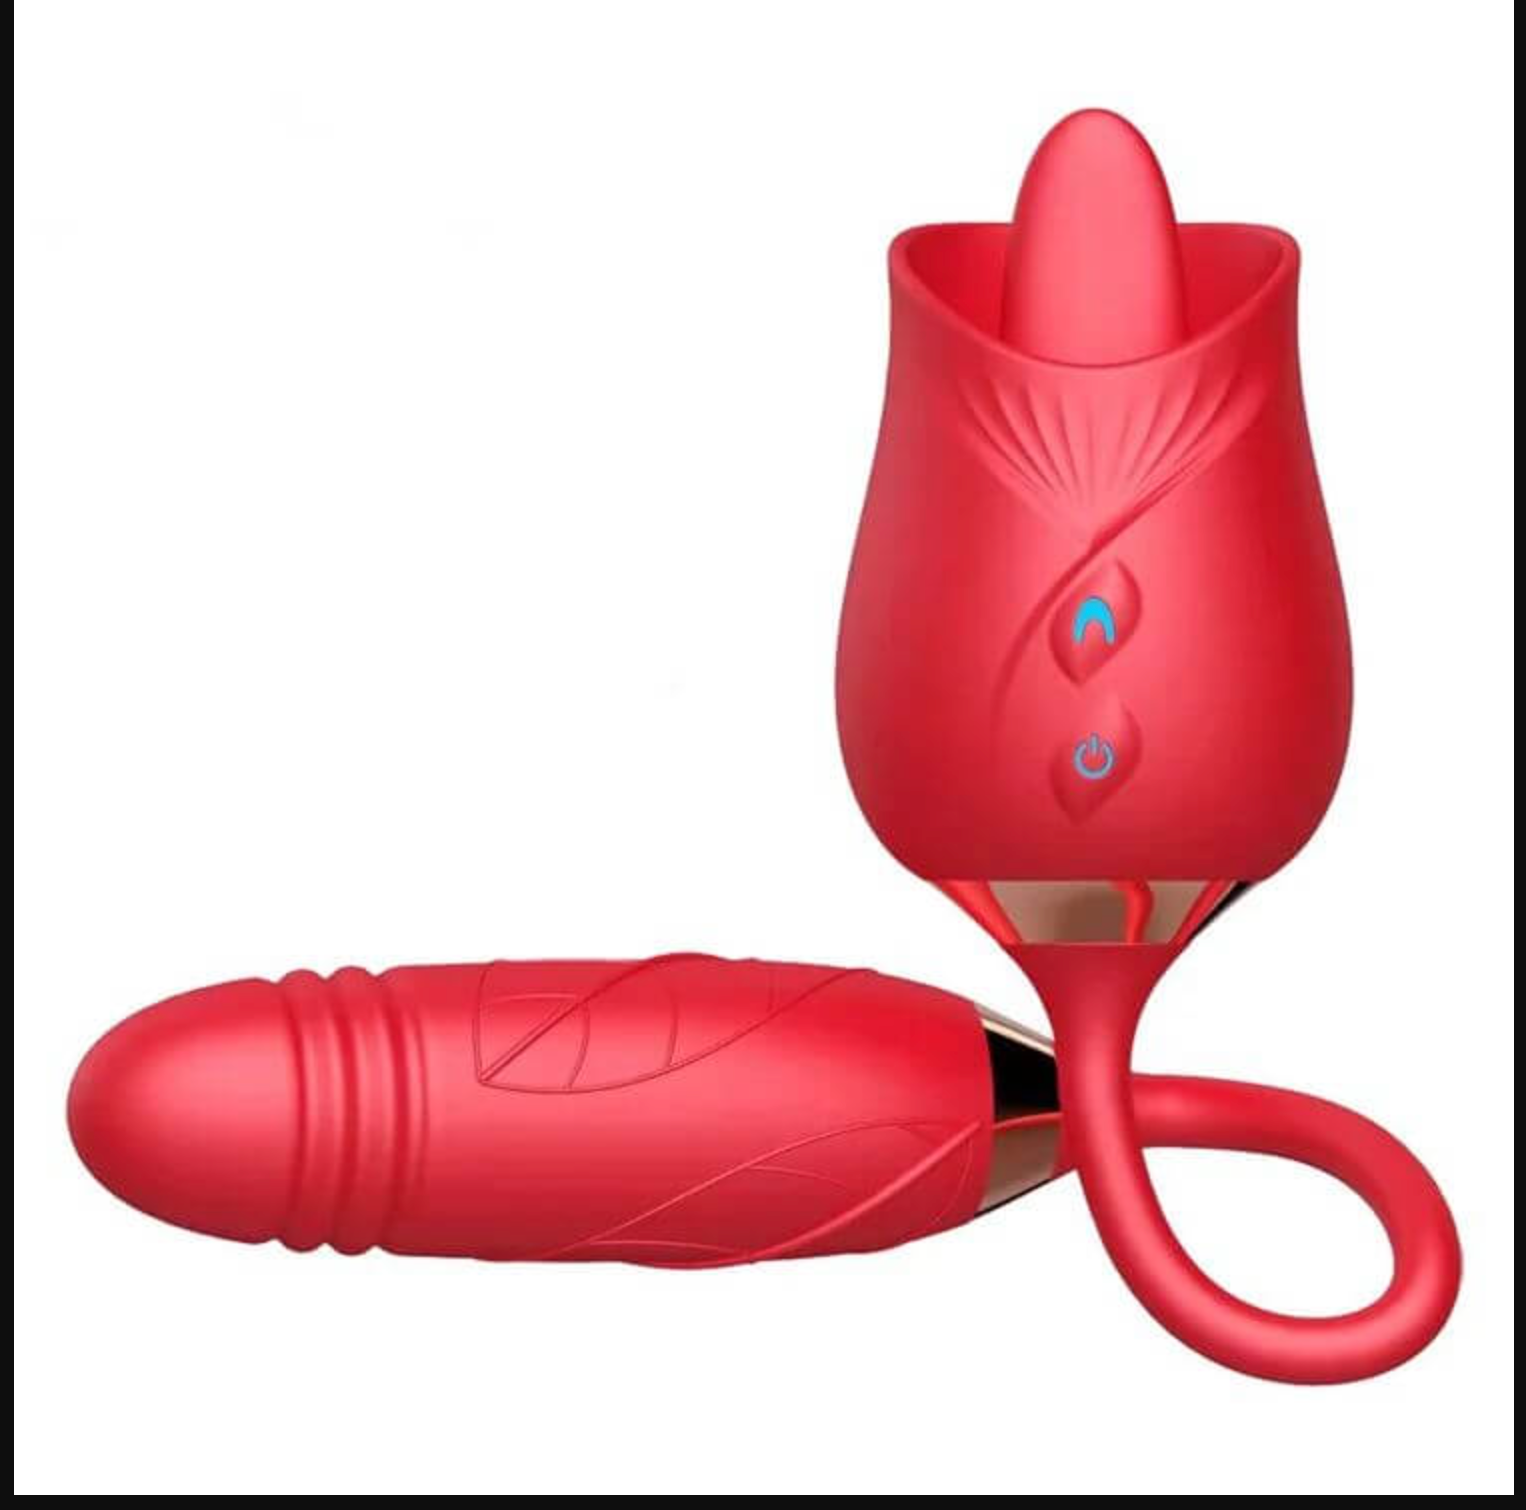 Thrusting Sucking Rose Toy Vibrator Sex Toy With Licking Tongue - The Rose Toys